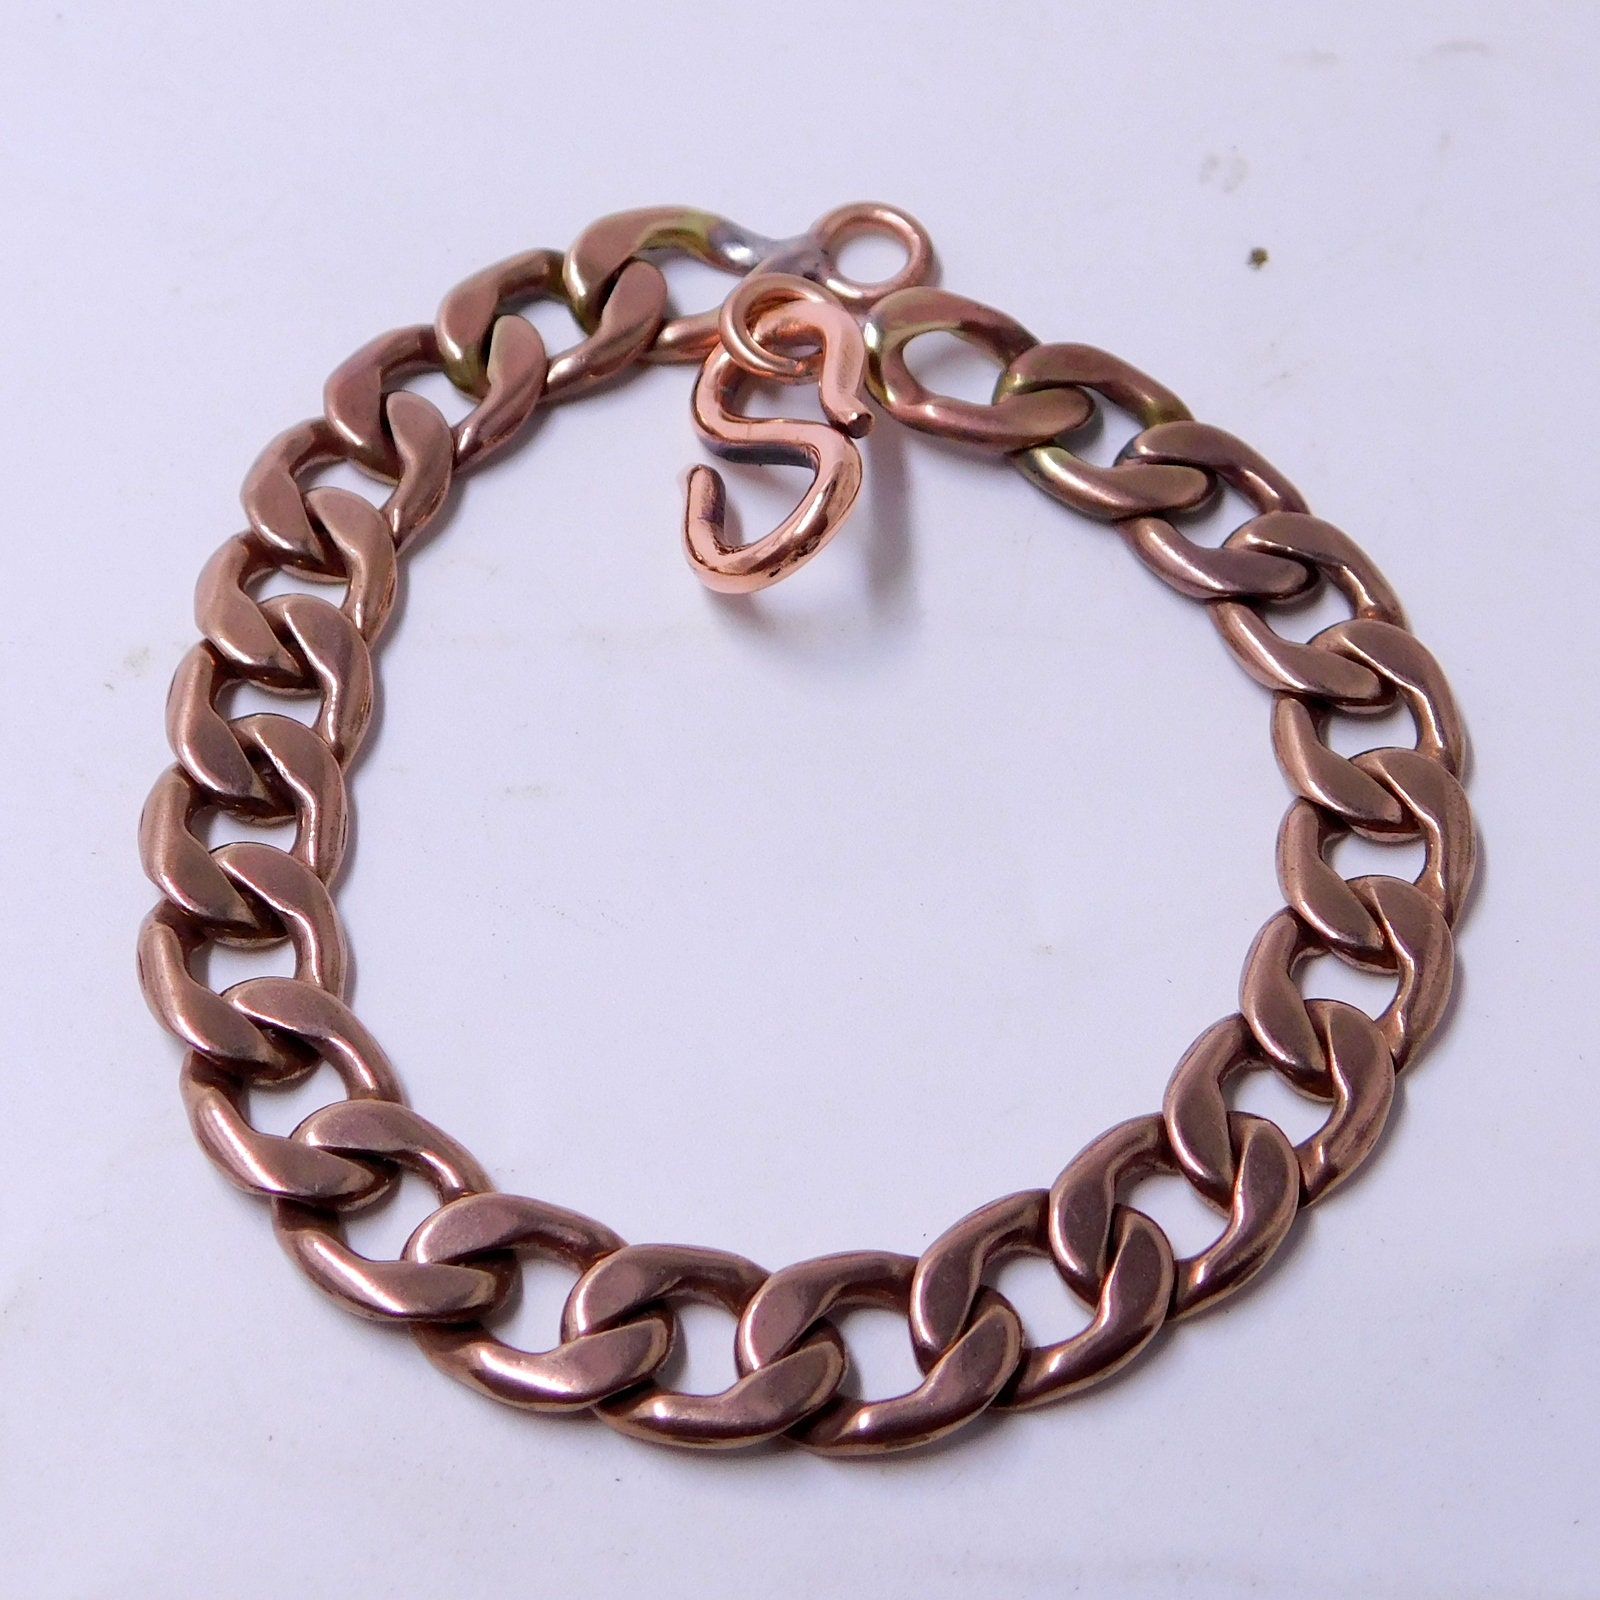 Juccini Copper Bracelet For Men & Women - Arthritis Pain Relief for Hands -  Copper Jewelry Made From High Gauge Pure Copper (Chain Healer, 1 Piece)  Chain Healer - 1 pc